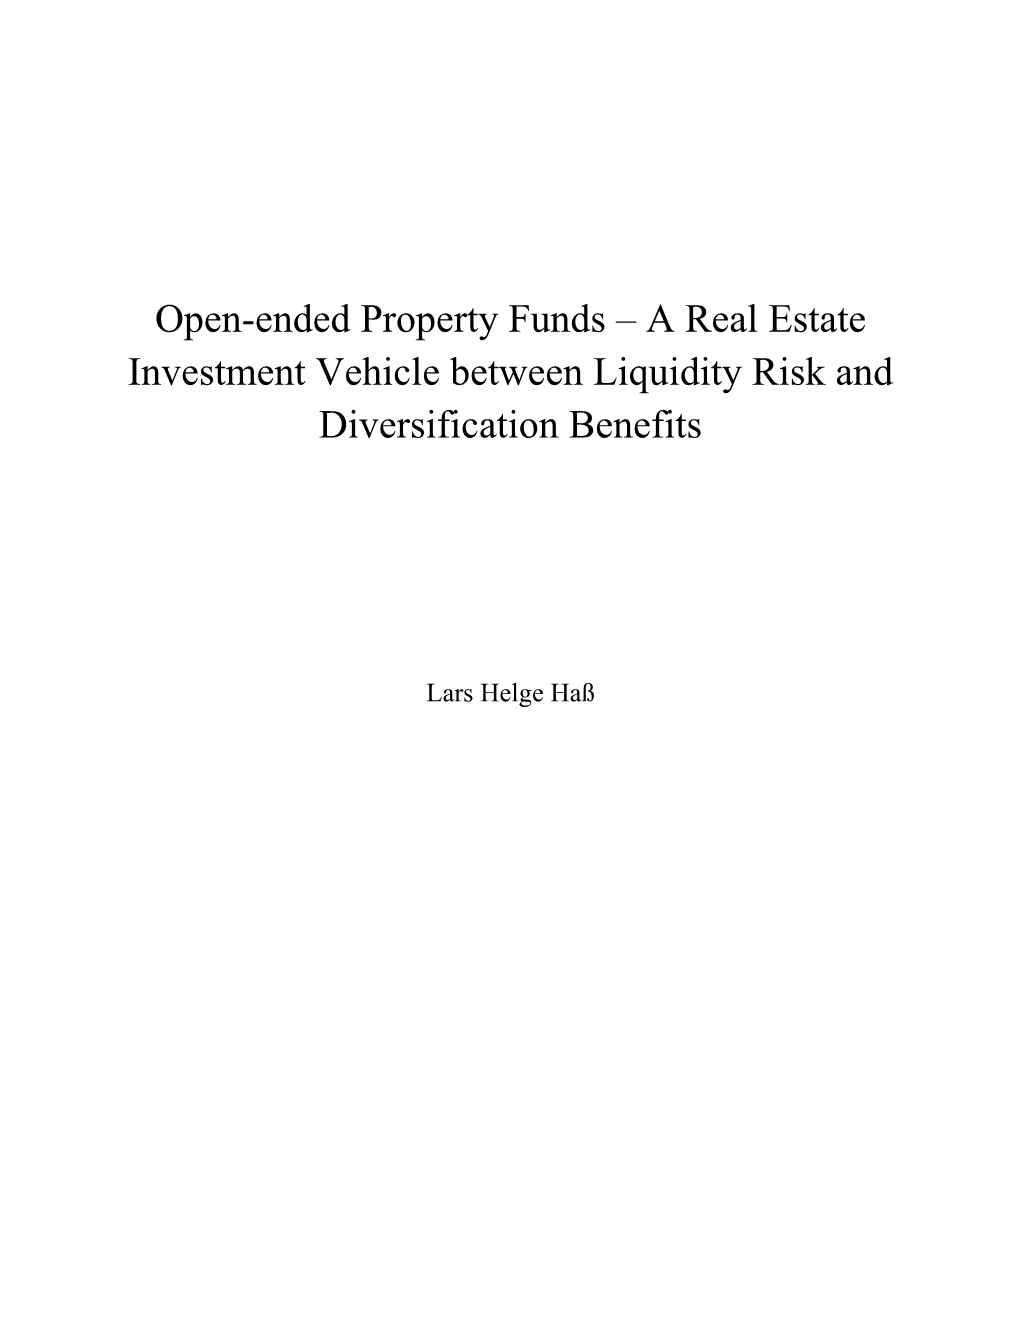 Open-Ended Property Funds – a Real Estate Investment Vehicle Between Liquidity Risk and Diversification Benefits